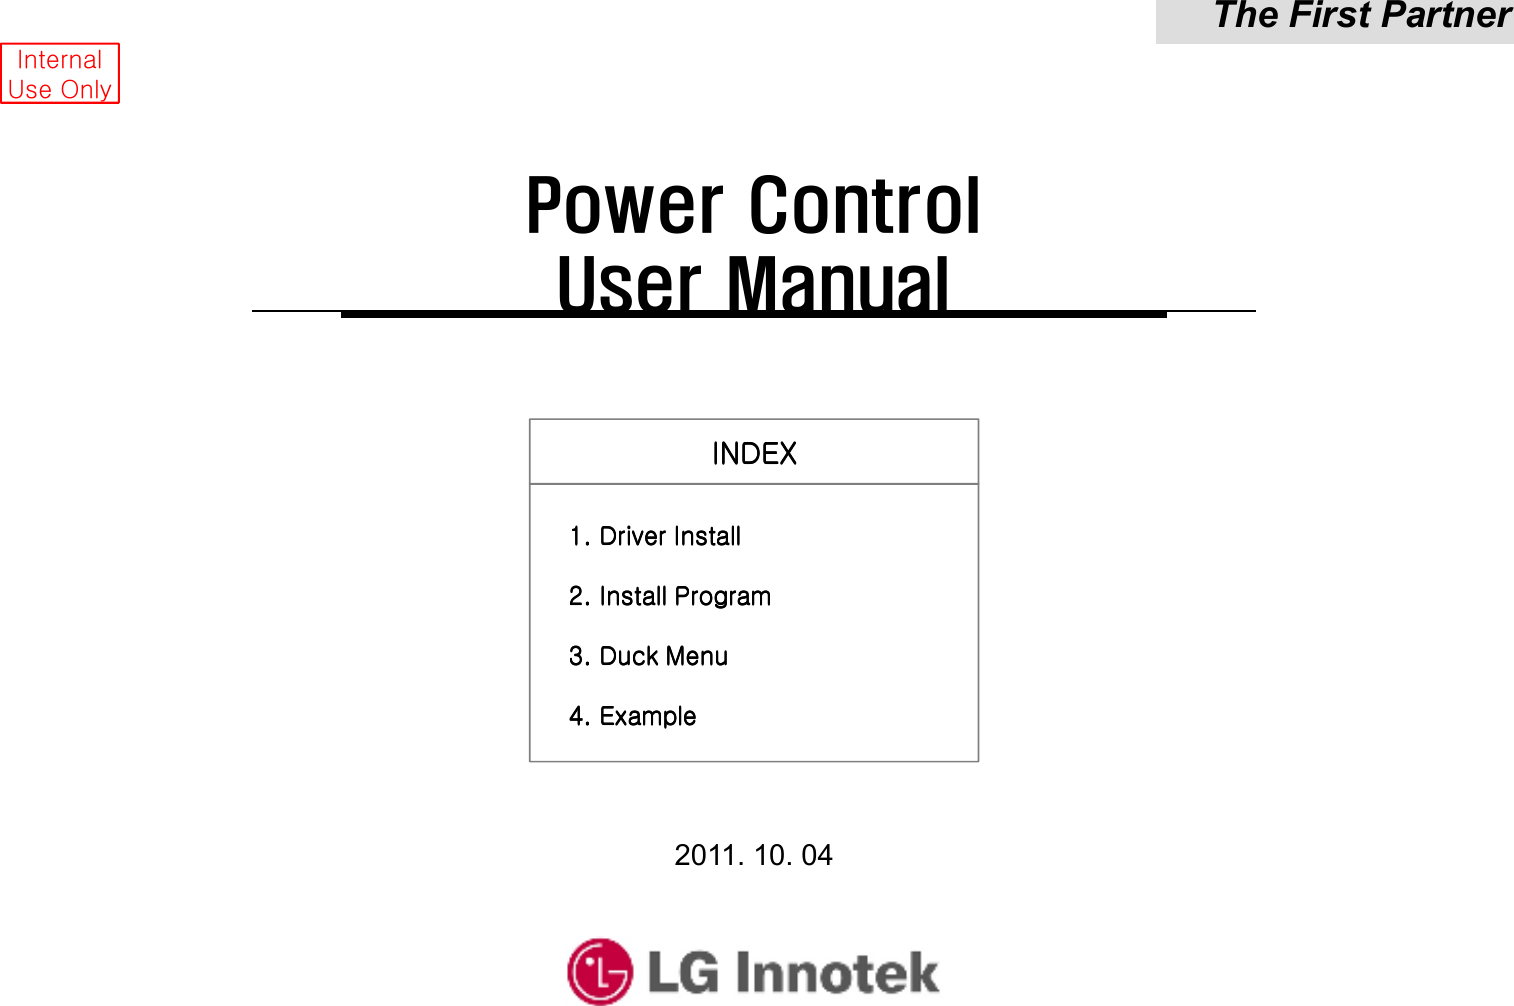 The First PartnerInternalUse OnlyINDEXINDEXINDEXINDEX2011. 10. 04Power Control User Manual1. Driver Install1. Driver Install1. Driver Install1. Driver Install2. Install Program2. Install Program2. Install Program2. Install Program3. Duck Menu3. Duck Menu3. Duck Menu3. Duck Menu4. Example4. Example4. Example4. Example